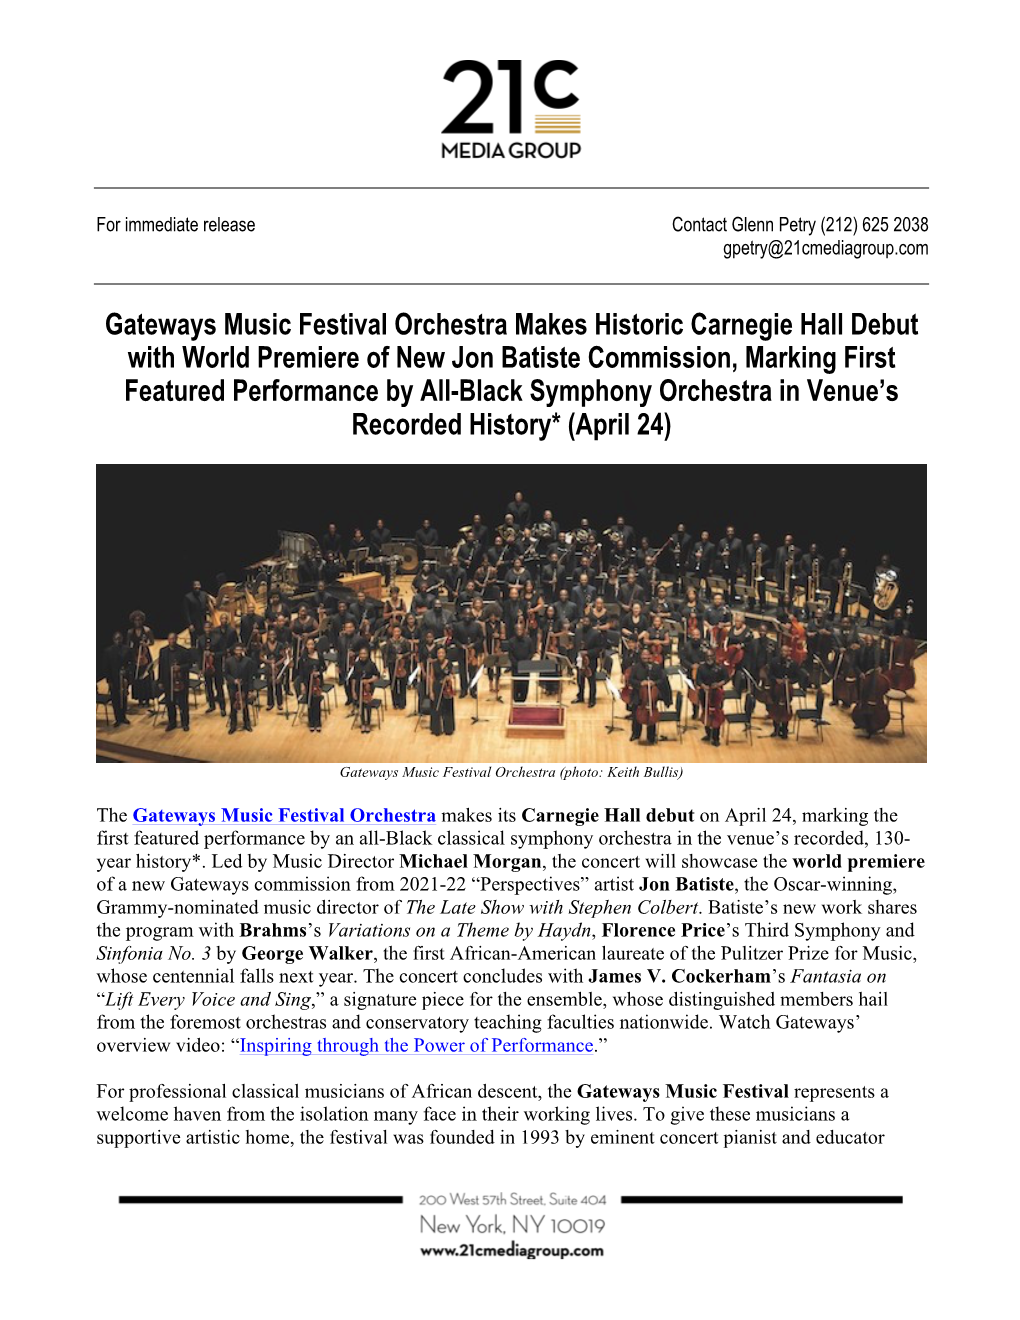 Gateways Music Festival Orchestra Makes Historic Carnegie Hall Debut